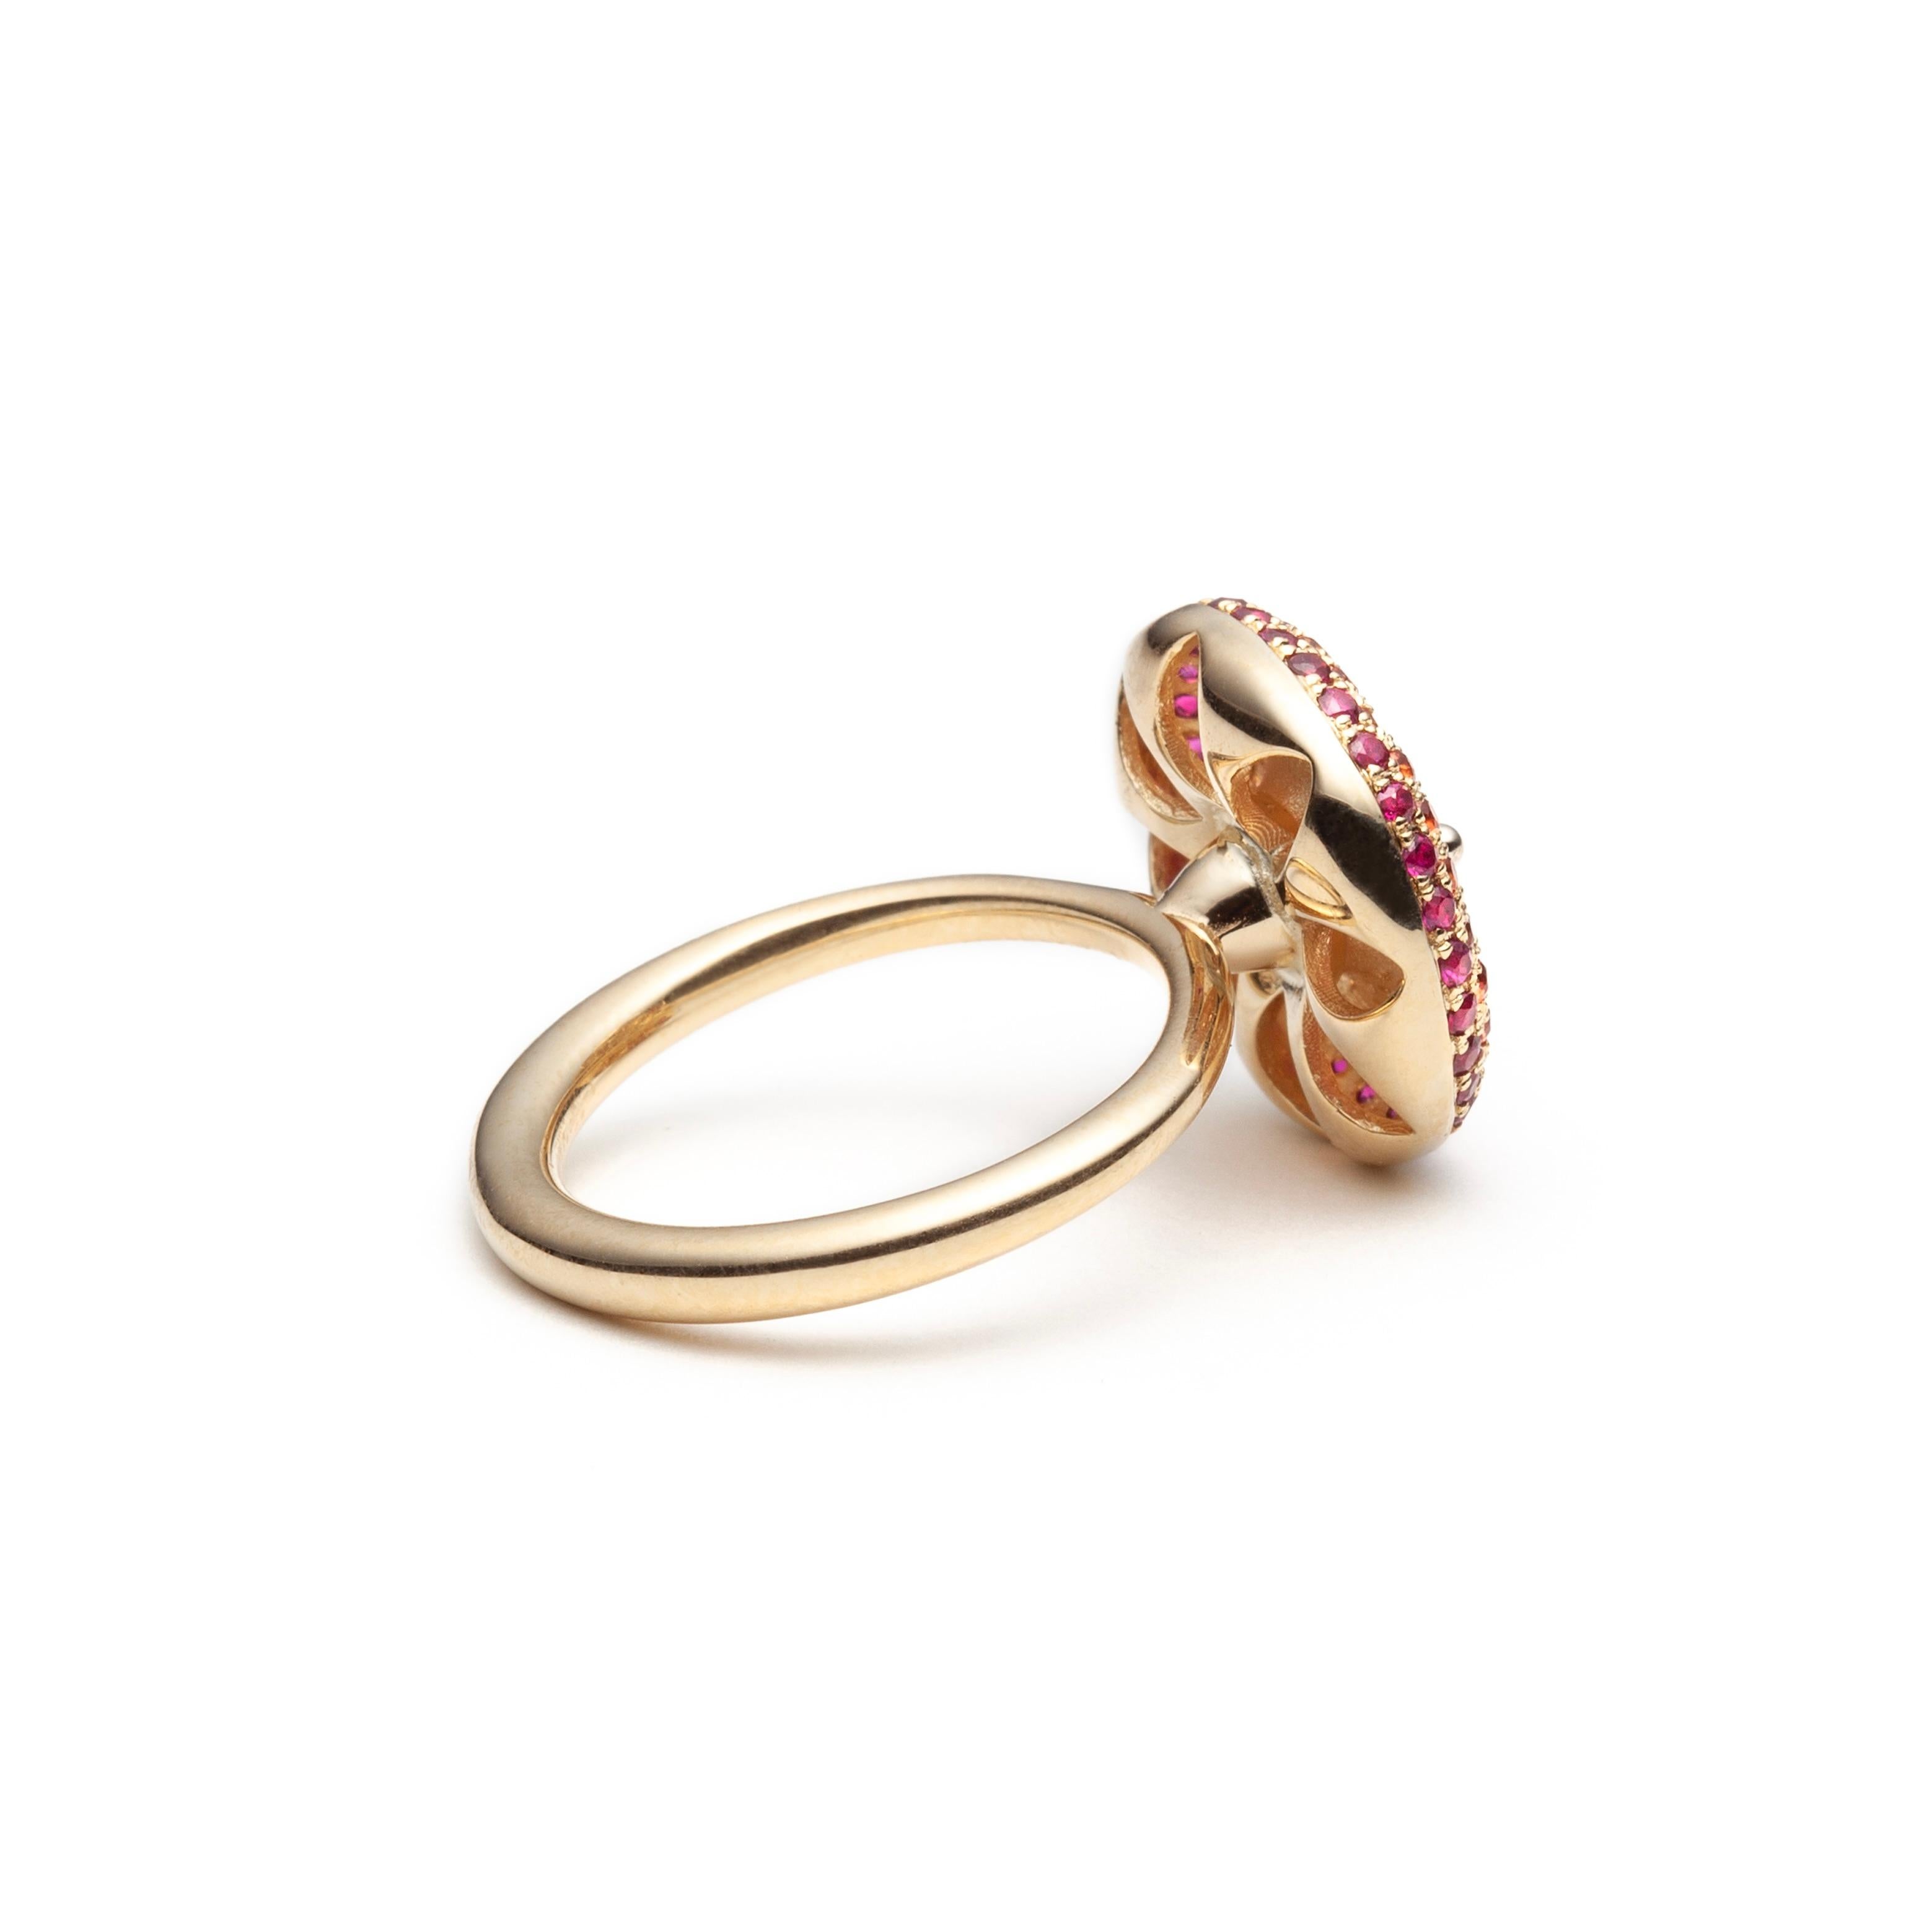 Yellow to Pink Sapphire Pavé Ring in 18K Yellow + White Gold by SERAFINO

This sapphire pavé ring in 18k yellow features a doughnut shaped top paved with color graded sapphires starting with ruby-red on the outside edge and passing through shades of